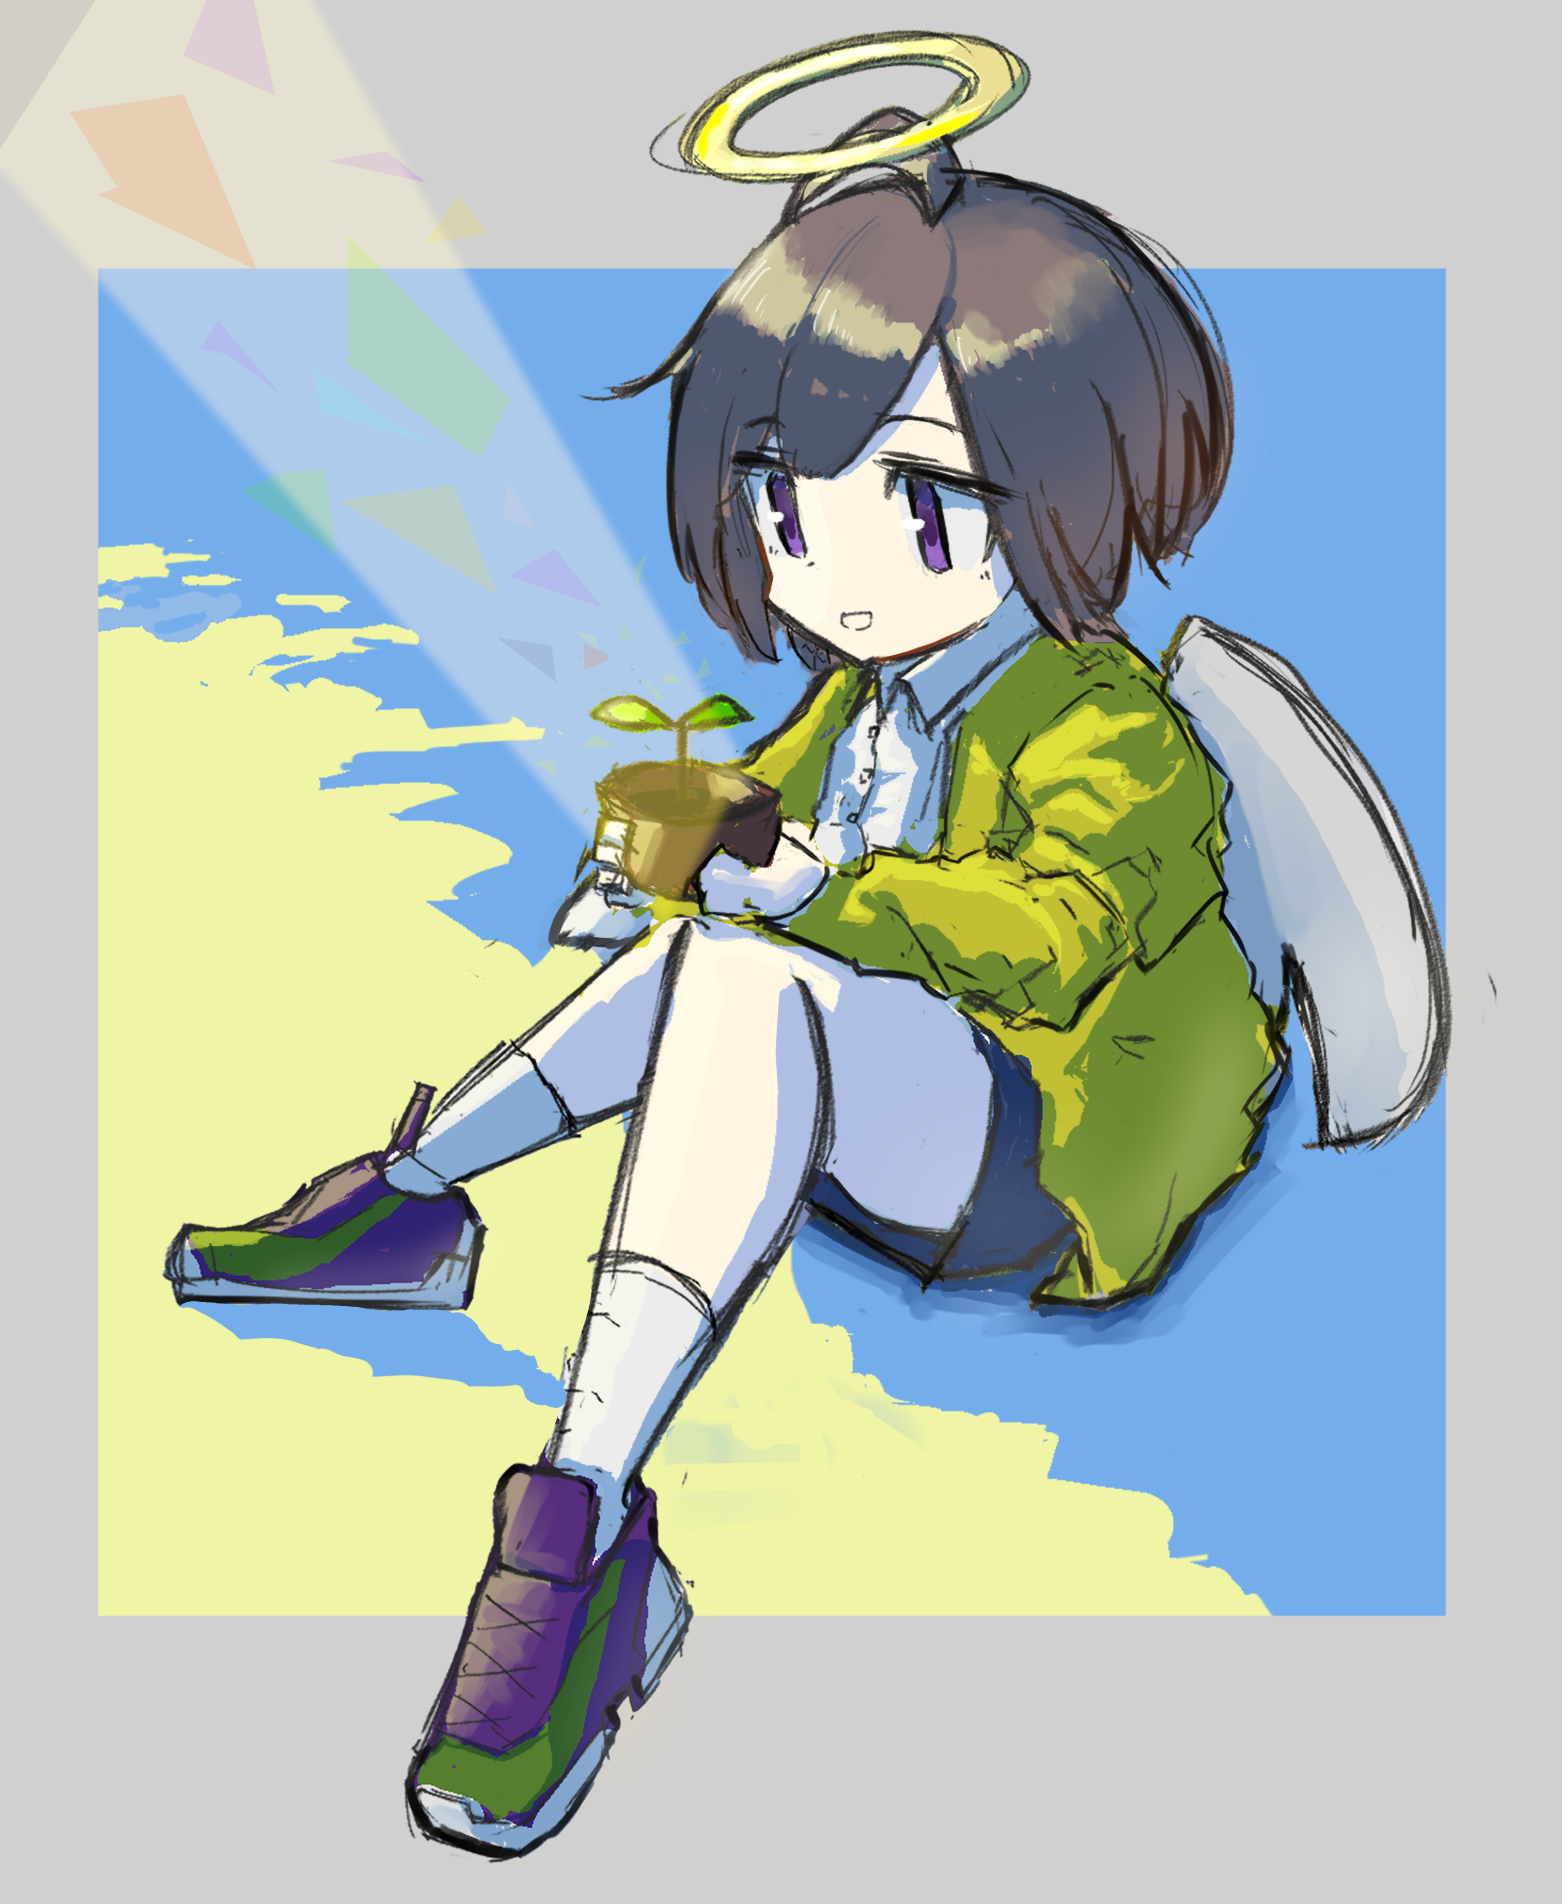 images/others/illust/2022_11_17-plant_girl_01.png